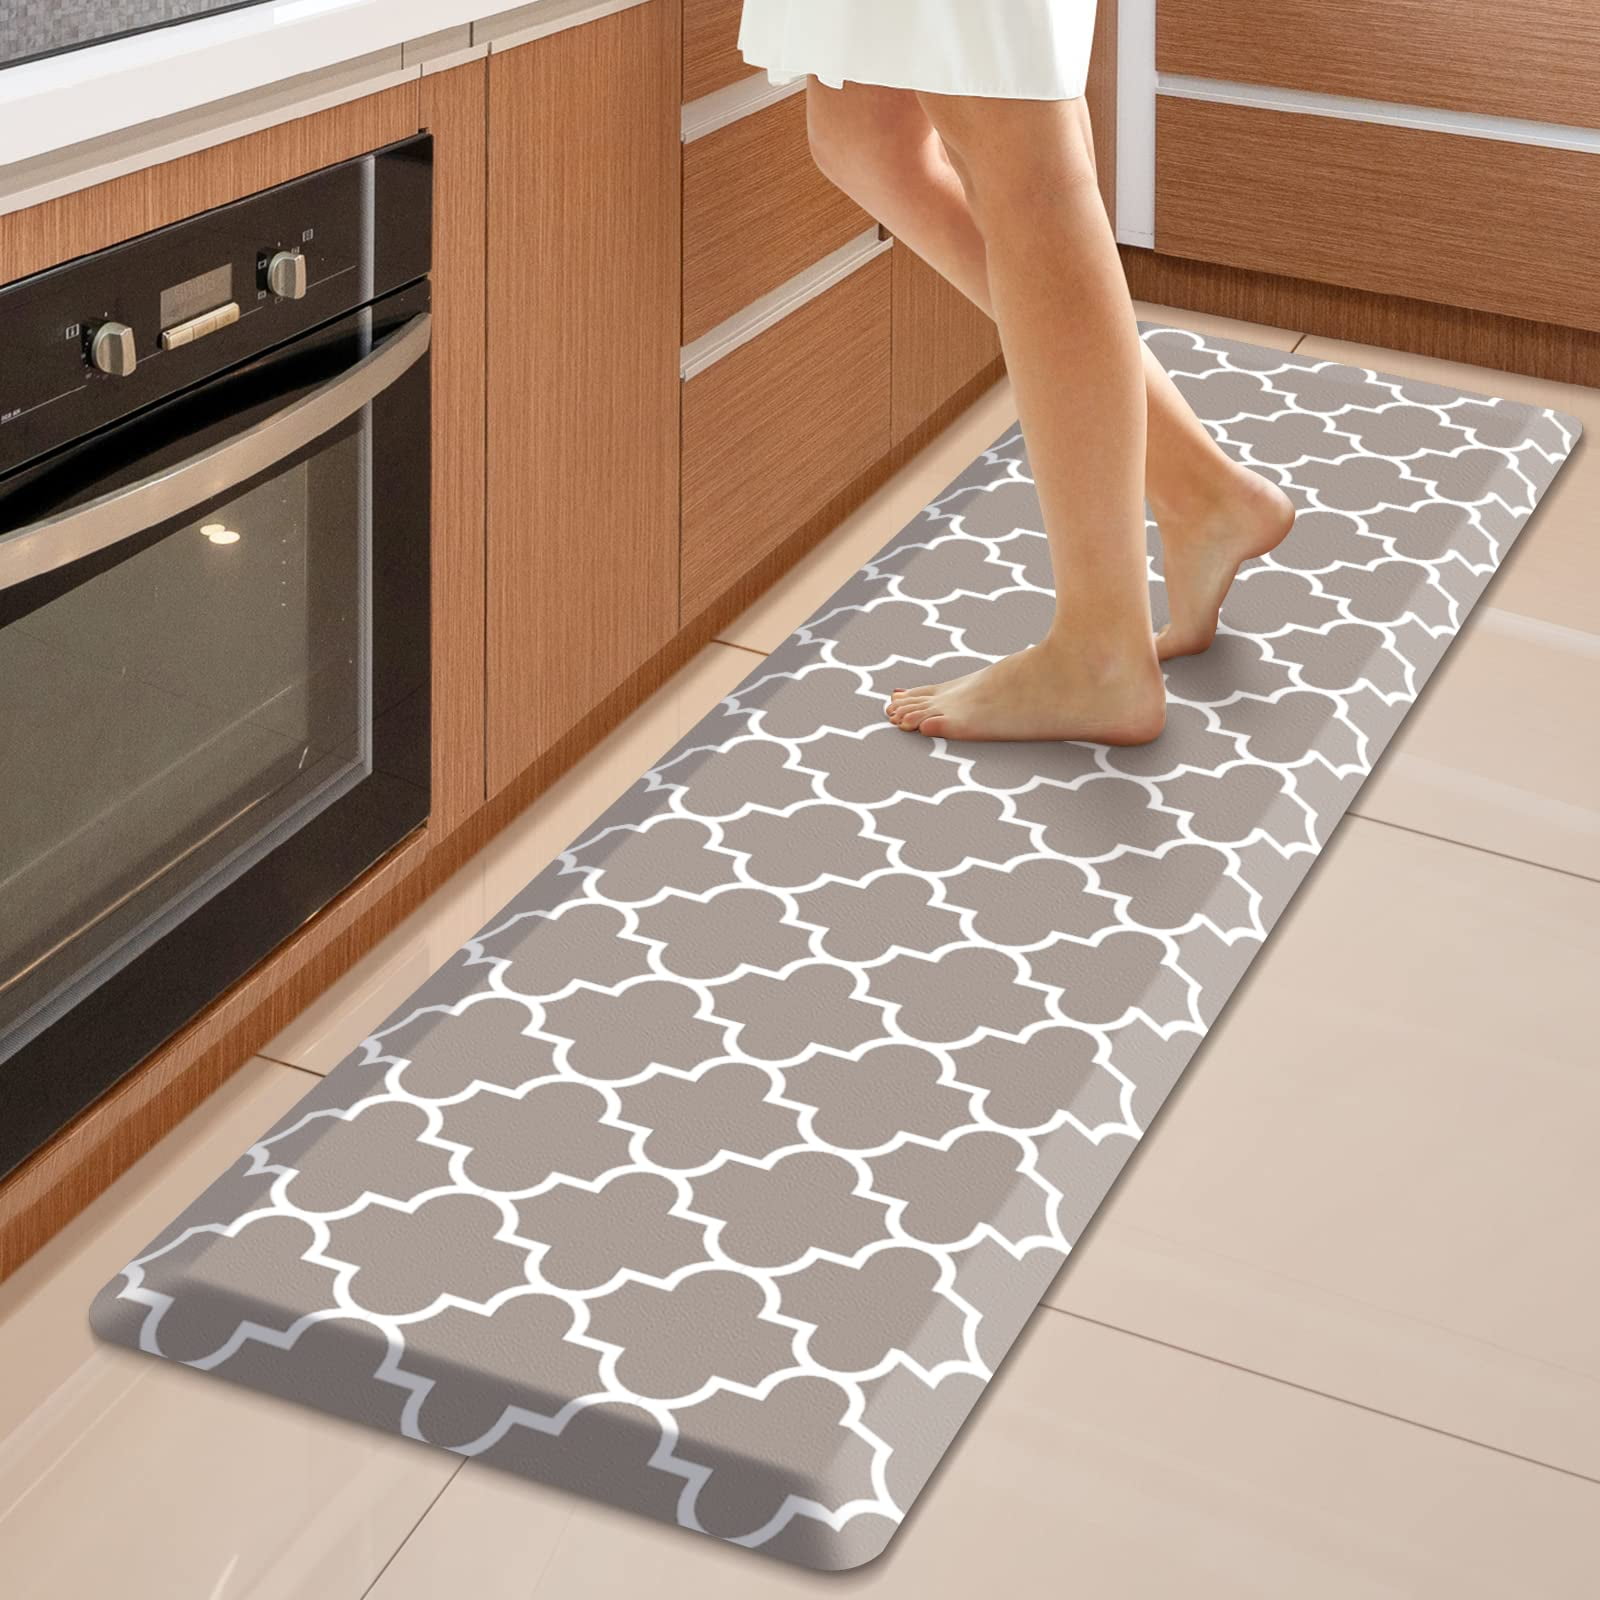 Elegant Comfort Cushioned Anti Fatigue - Extra 3/4 inch Thick - Standing Comfort Kitchen Mat - Oversized - Waterproof, Non-Slip Backing Rug 